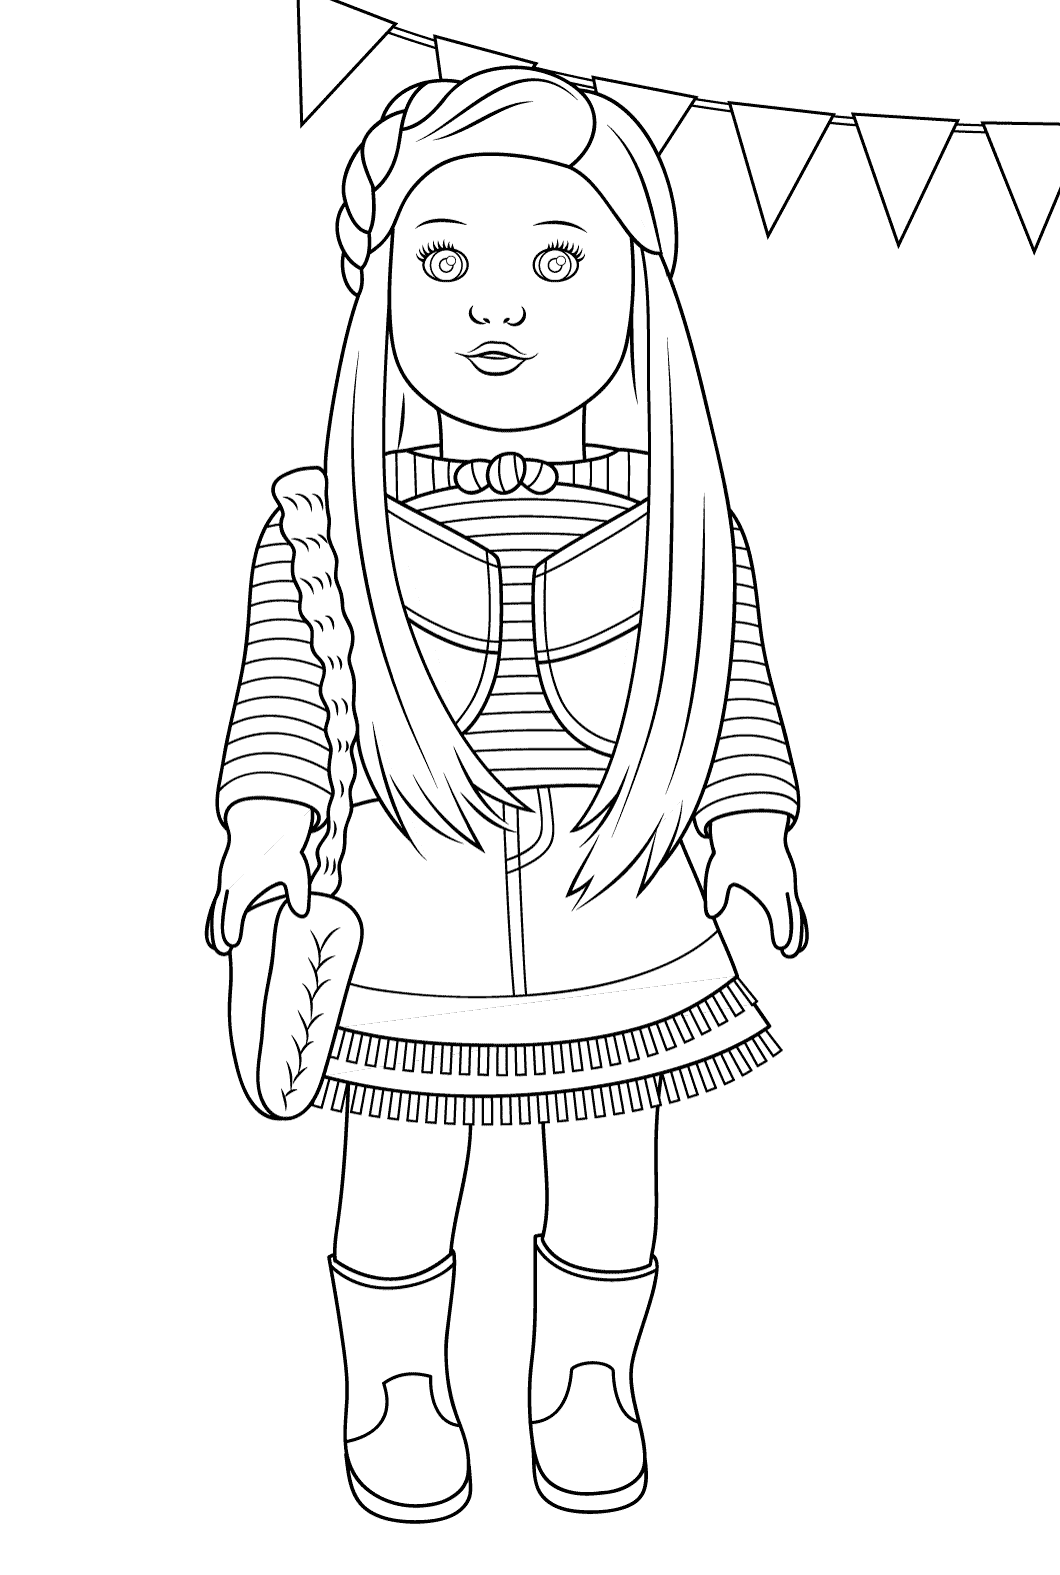 https://www.bestcoloringpagesforkids.com/wp-content/uploads/2018/12/American-Girl-Coloring-Pages.png